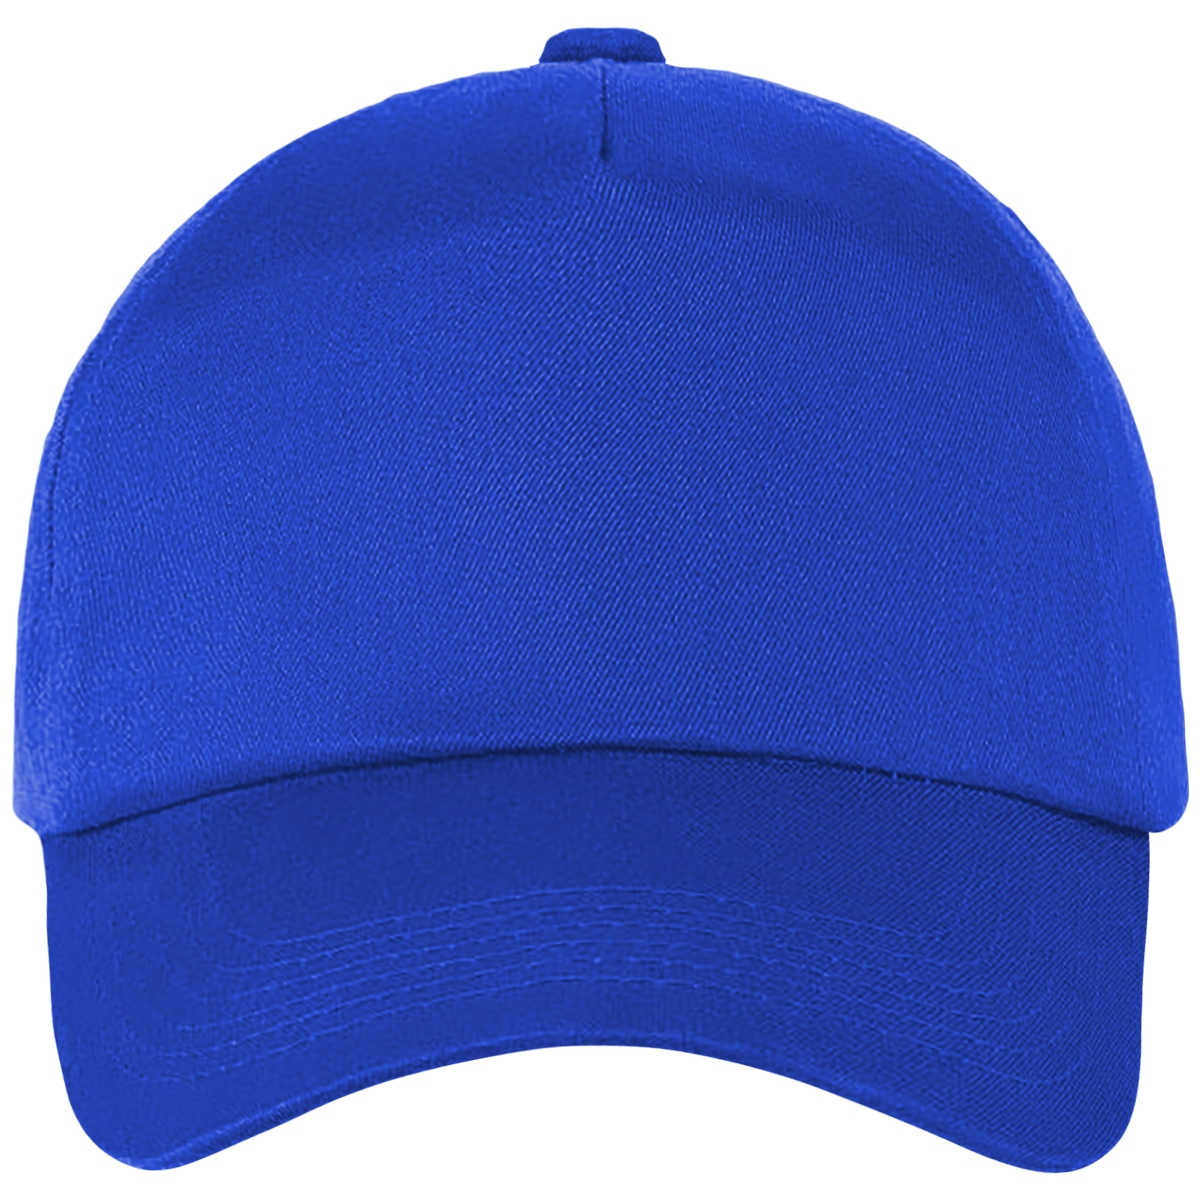 Customizable Fashion Cap In Embroidery And Printing Bright Royal